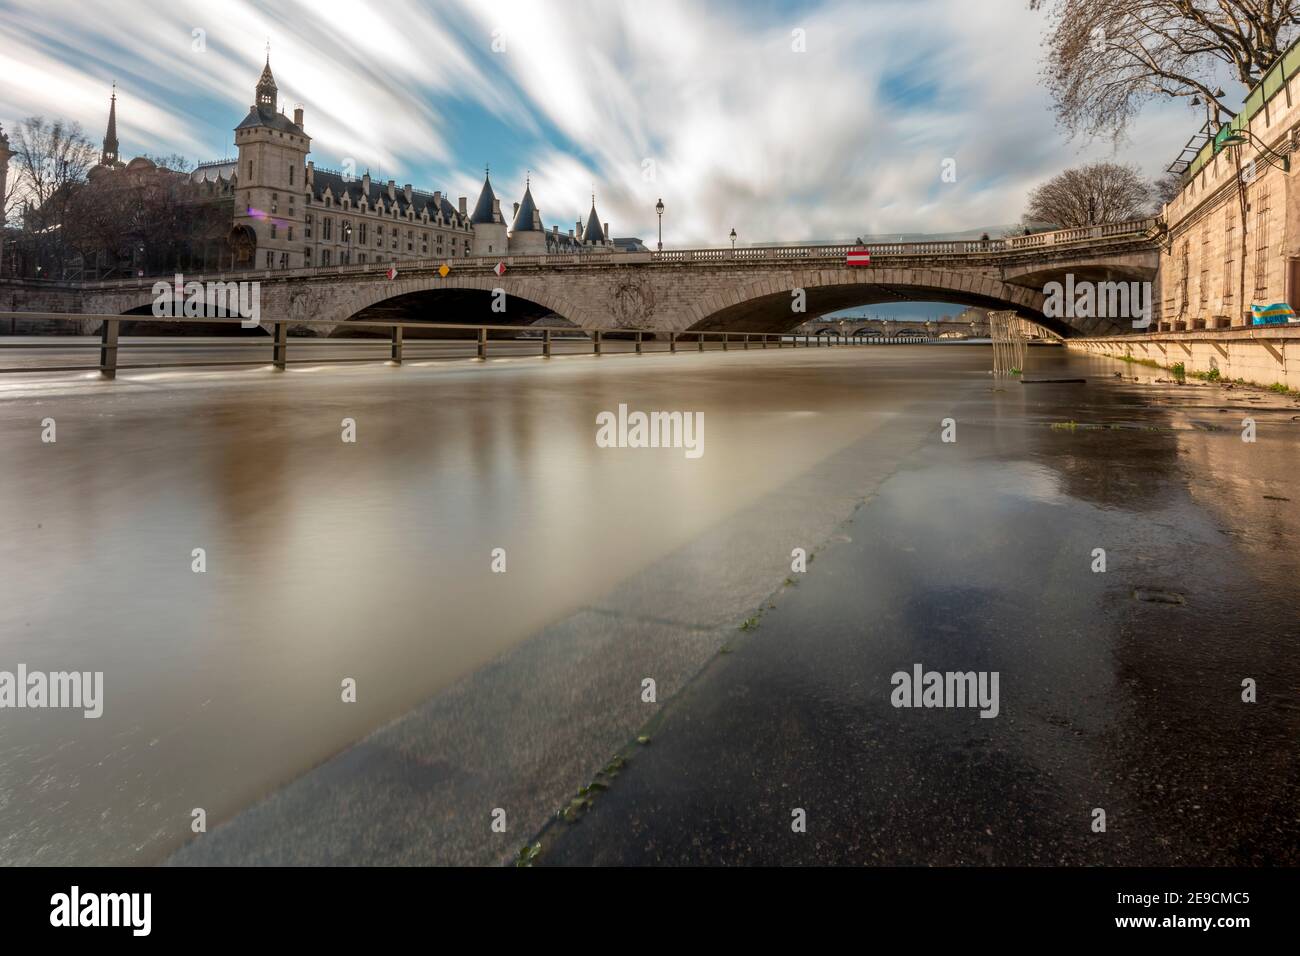 Paris, France - February 3, 2021: View of Paris flood as river Seine rises and approaches record level Stock Photo